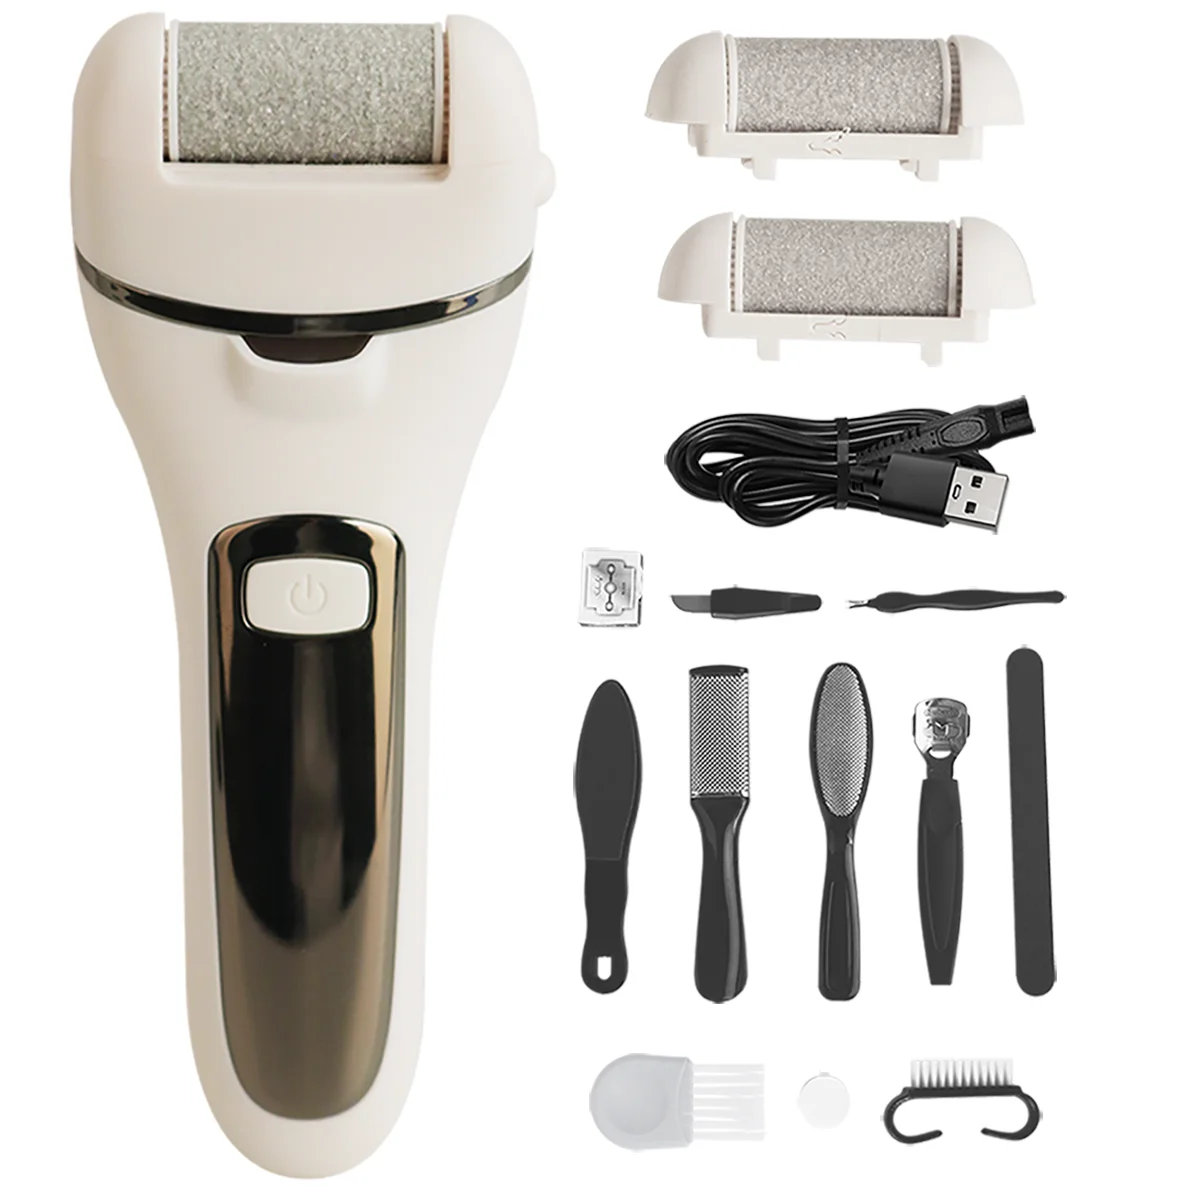 

KIKIDO Rechargeable Electric Foot File For Heels Grinding Pedicure Tools Professional Foot Care Dead Hard Skin Callus Remover